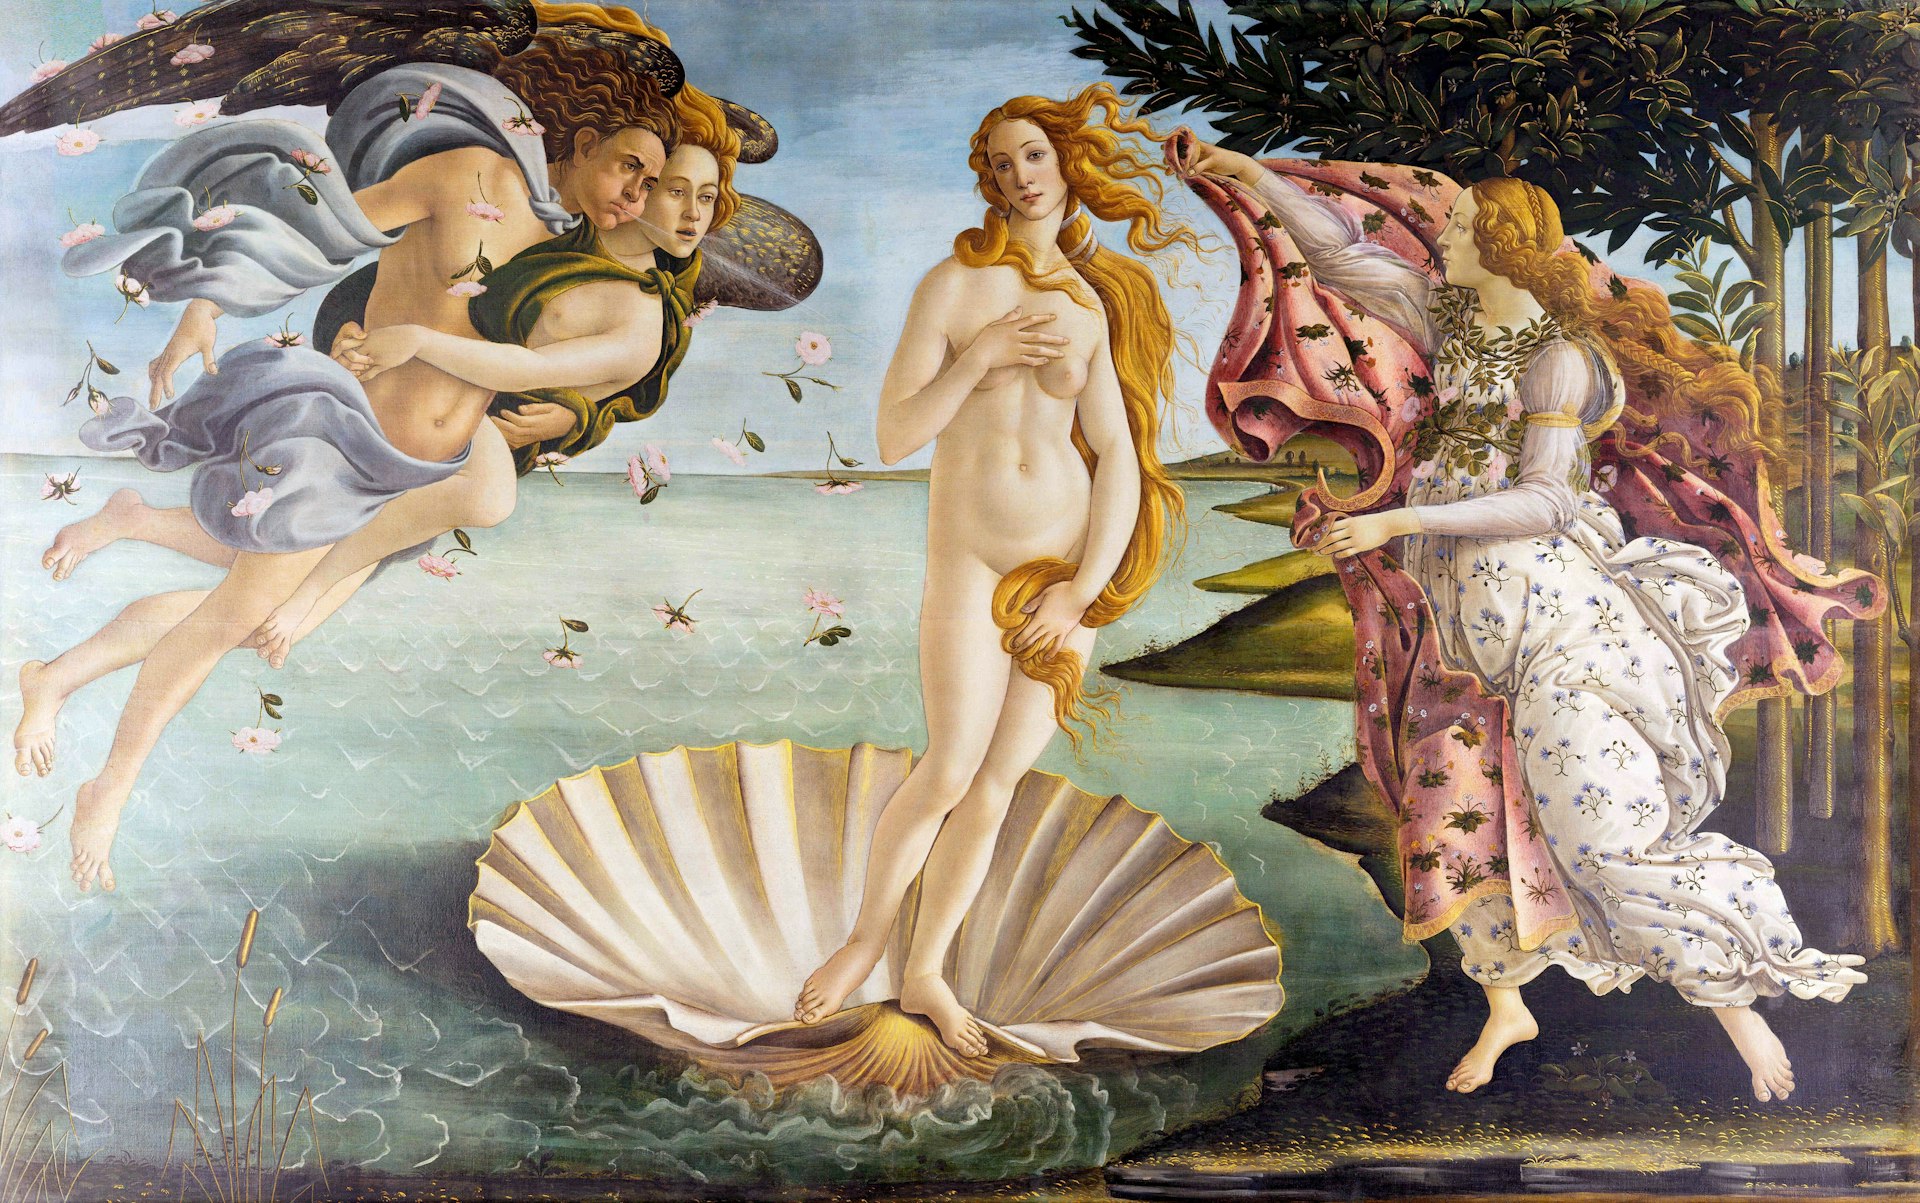 Botticelli's Birth of Venus is just one of the masterpieces on display at the Uffizi Museum. Image by GraphicaArtis / Getty Images 